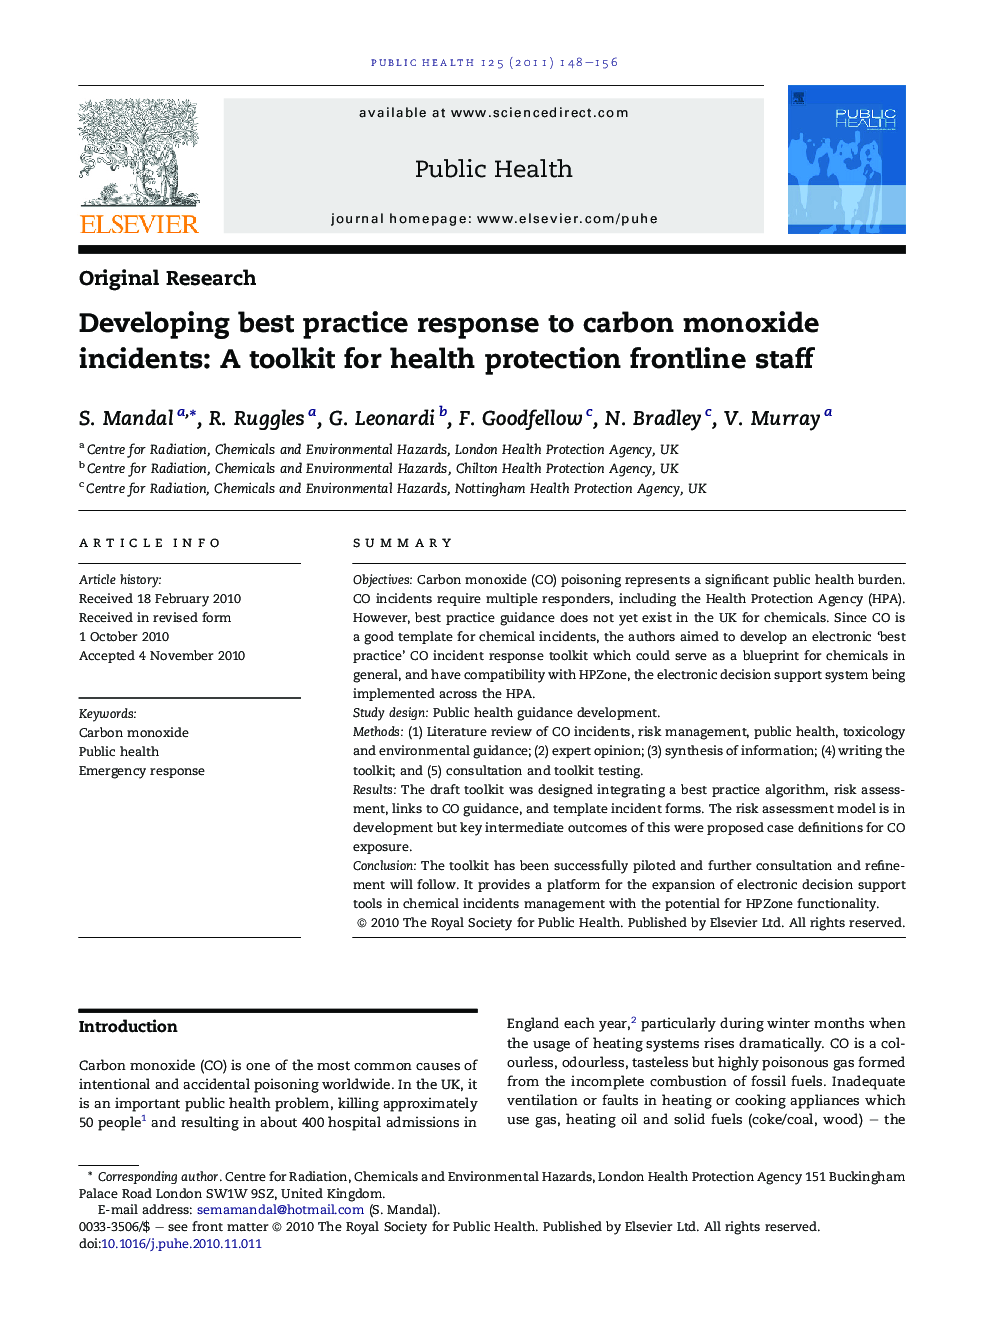 Developing best practice response to carbon monoxide incidents: A toolkit for health protection frontline staff